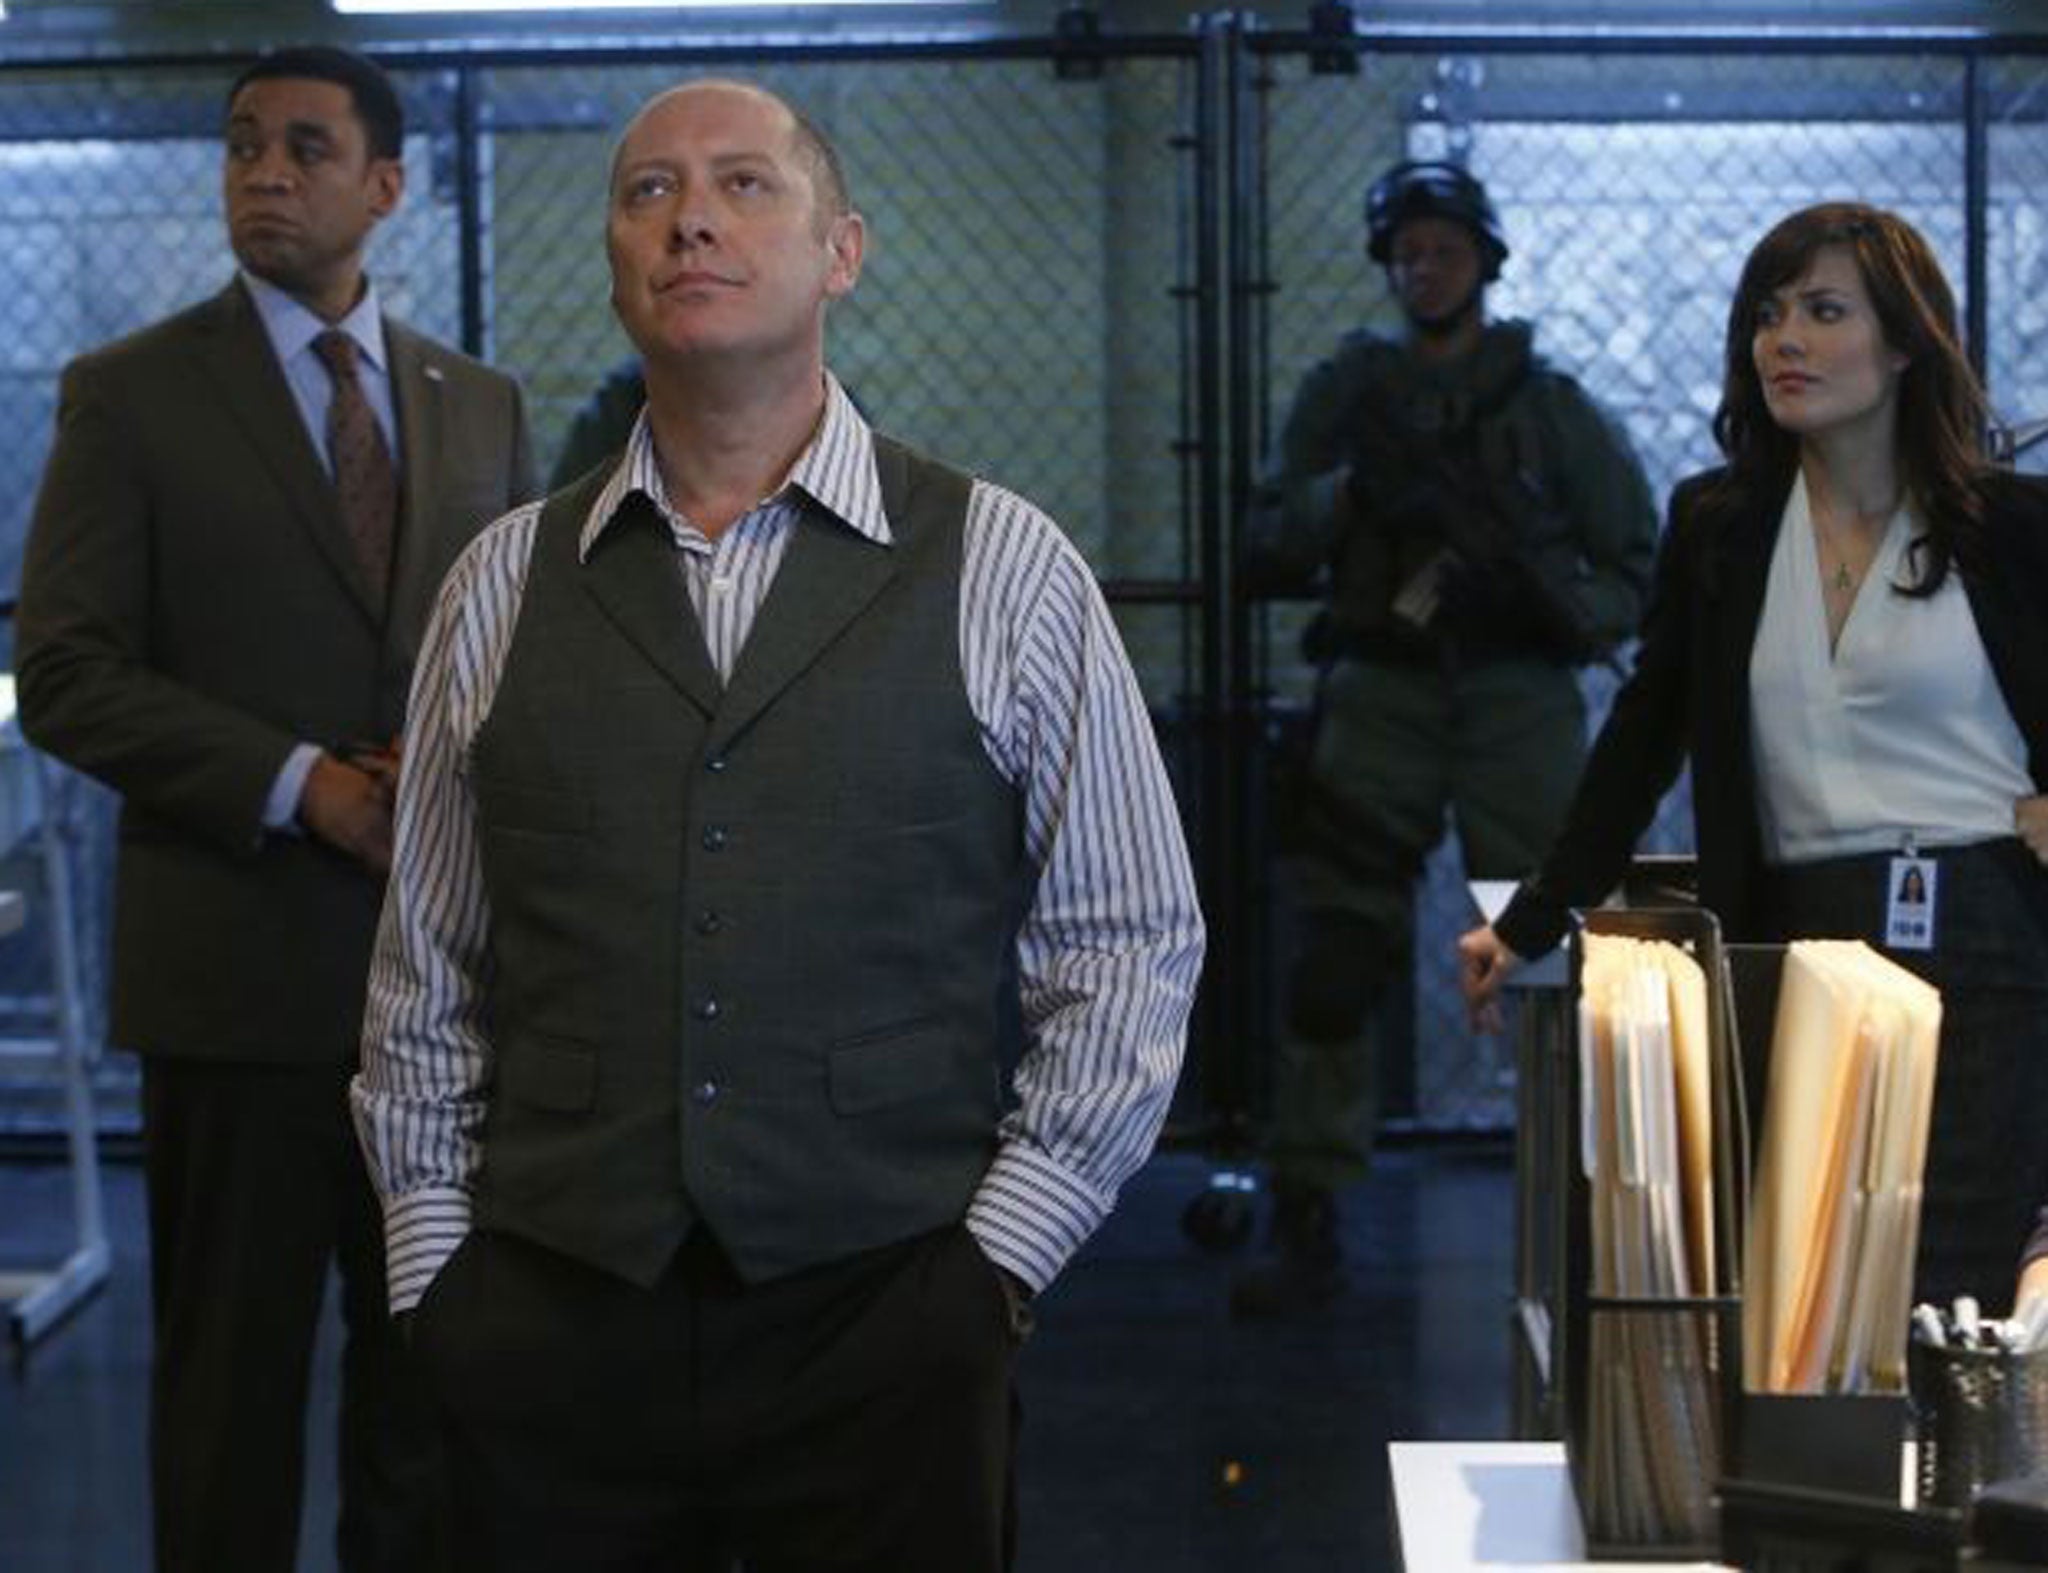 More glossy than gritty: James Spader and co in The Blacklist